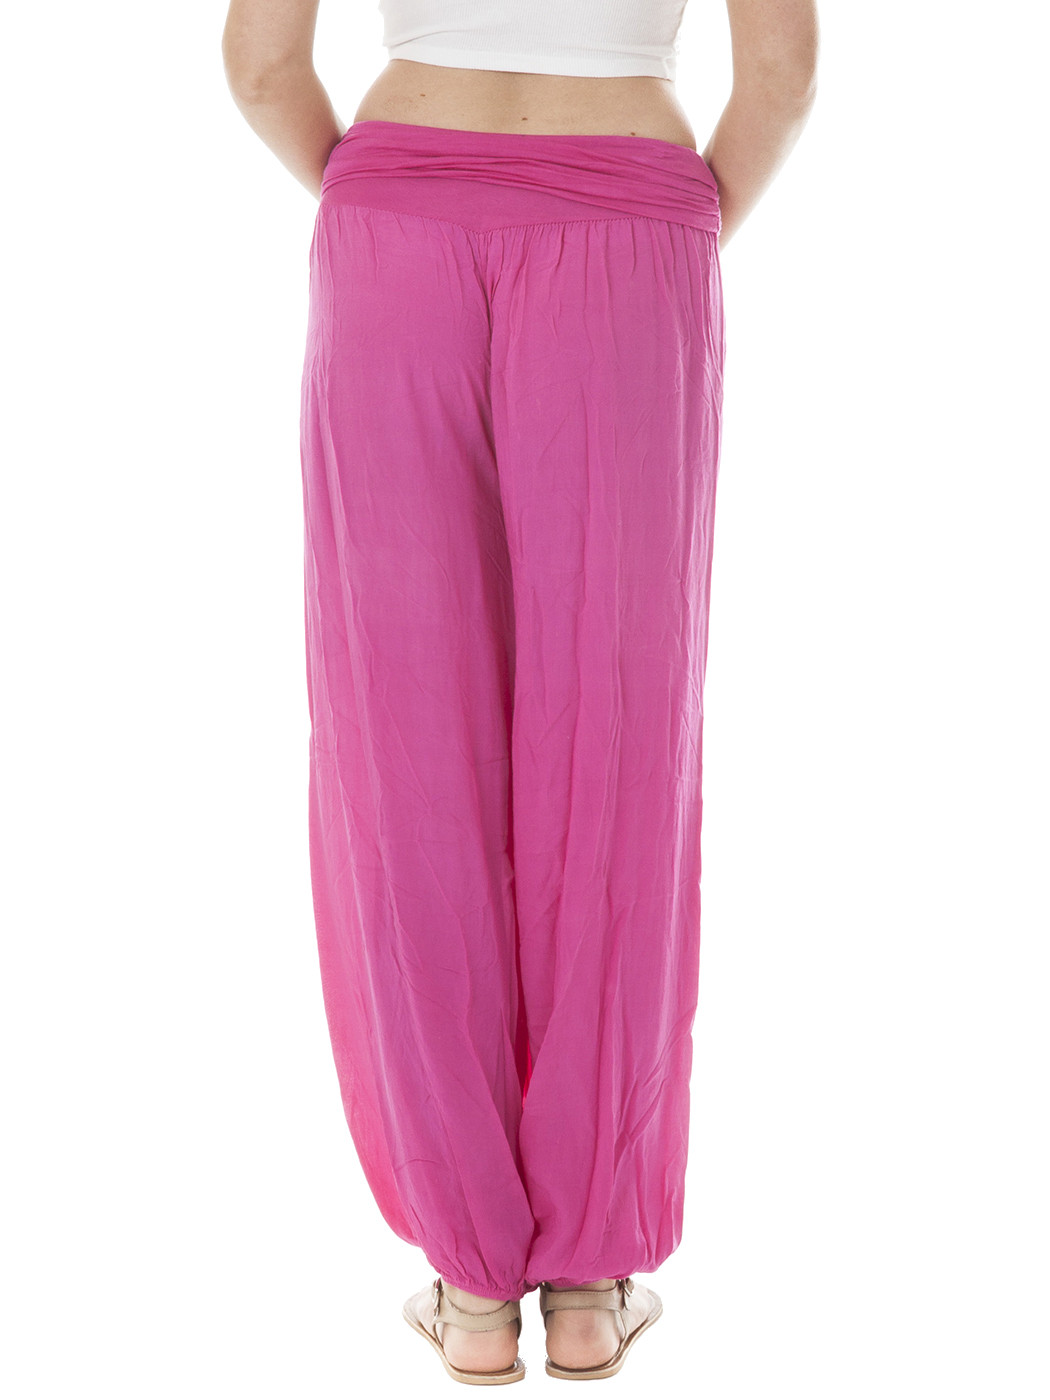 New Womens Italian Lagenlook Baggy Flowy Stretchy Harem Pants Trousers ...